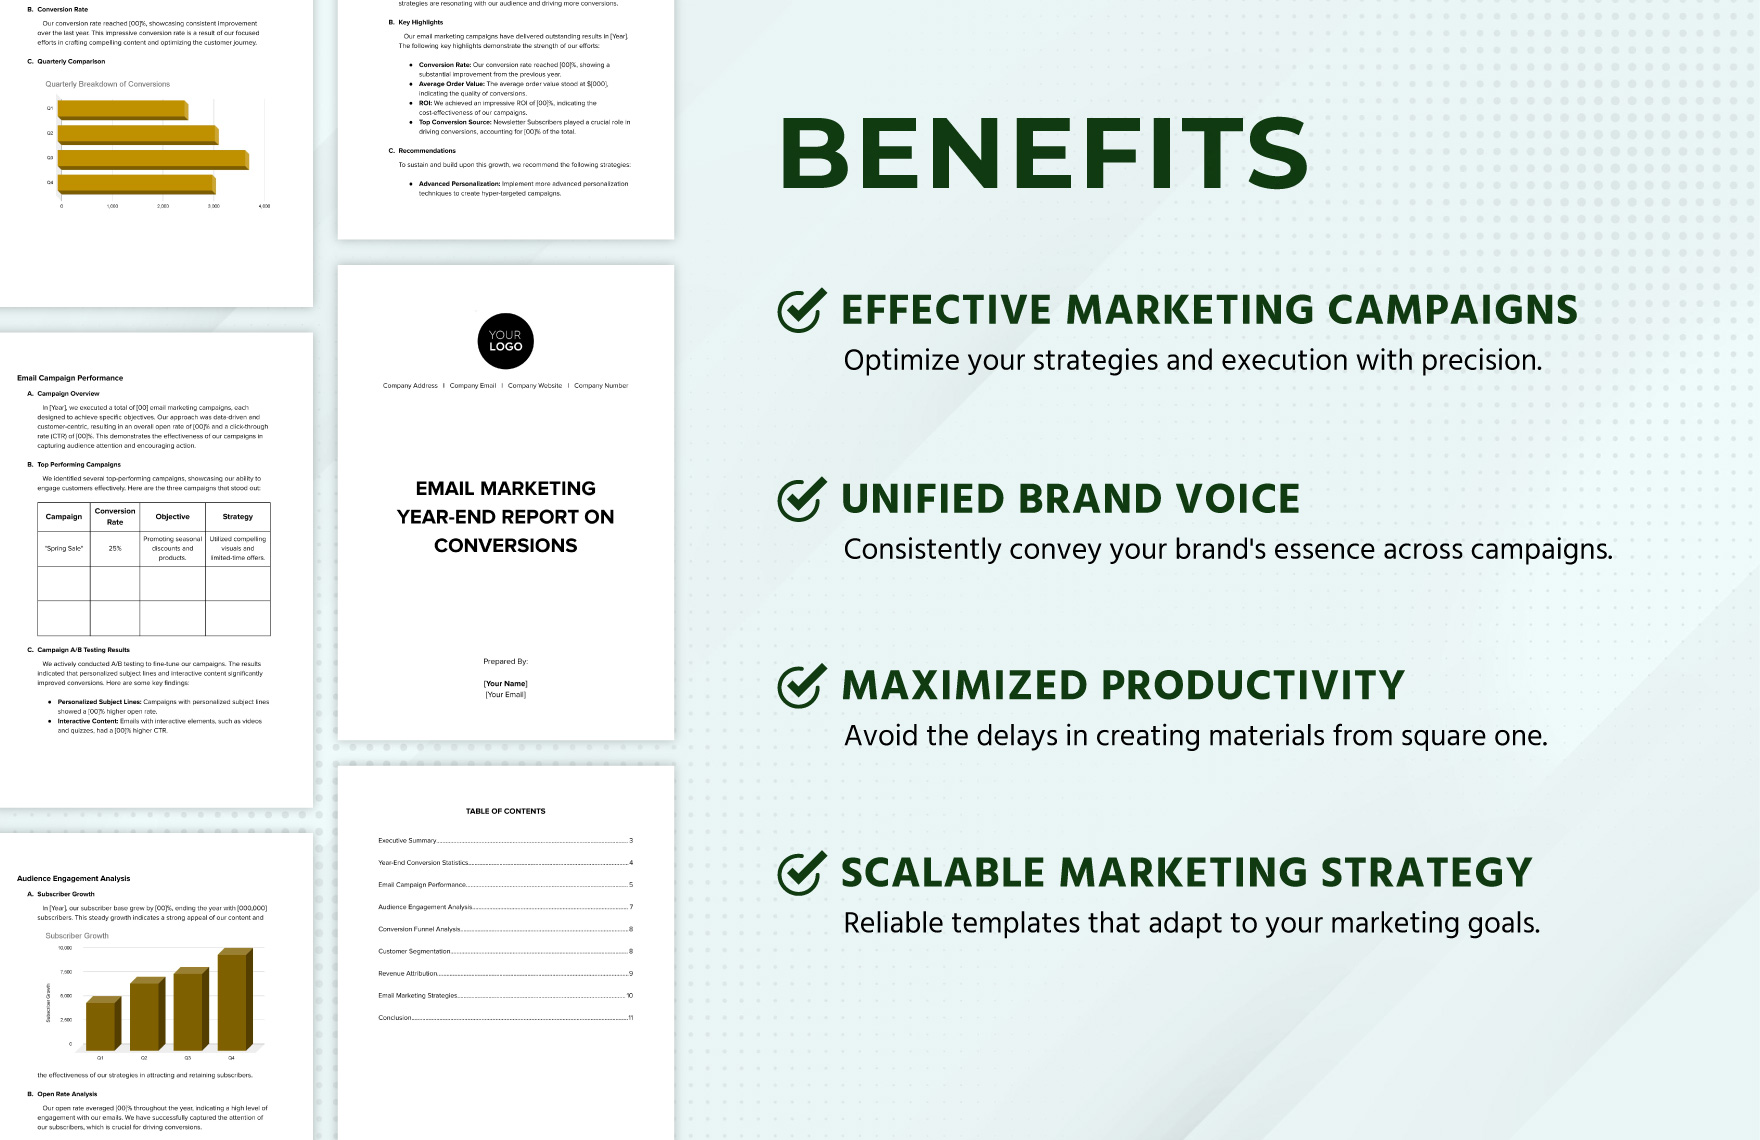 Email Marketing Year-end Report on Conversions Template